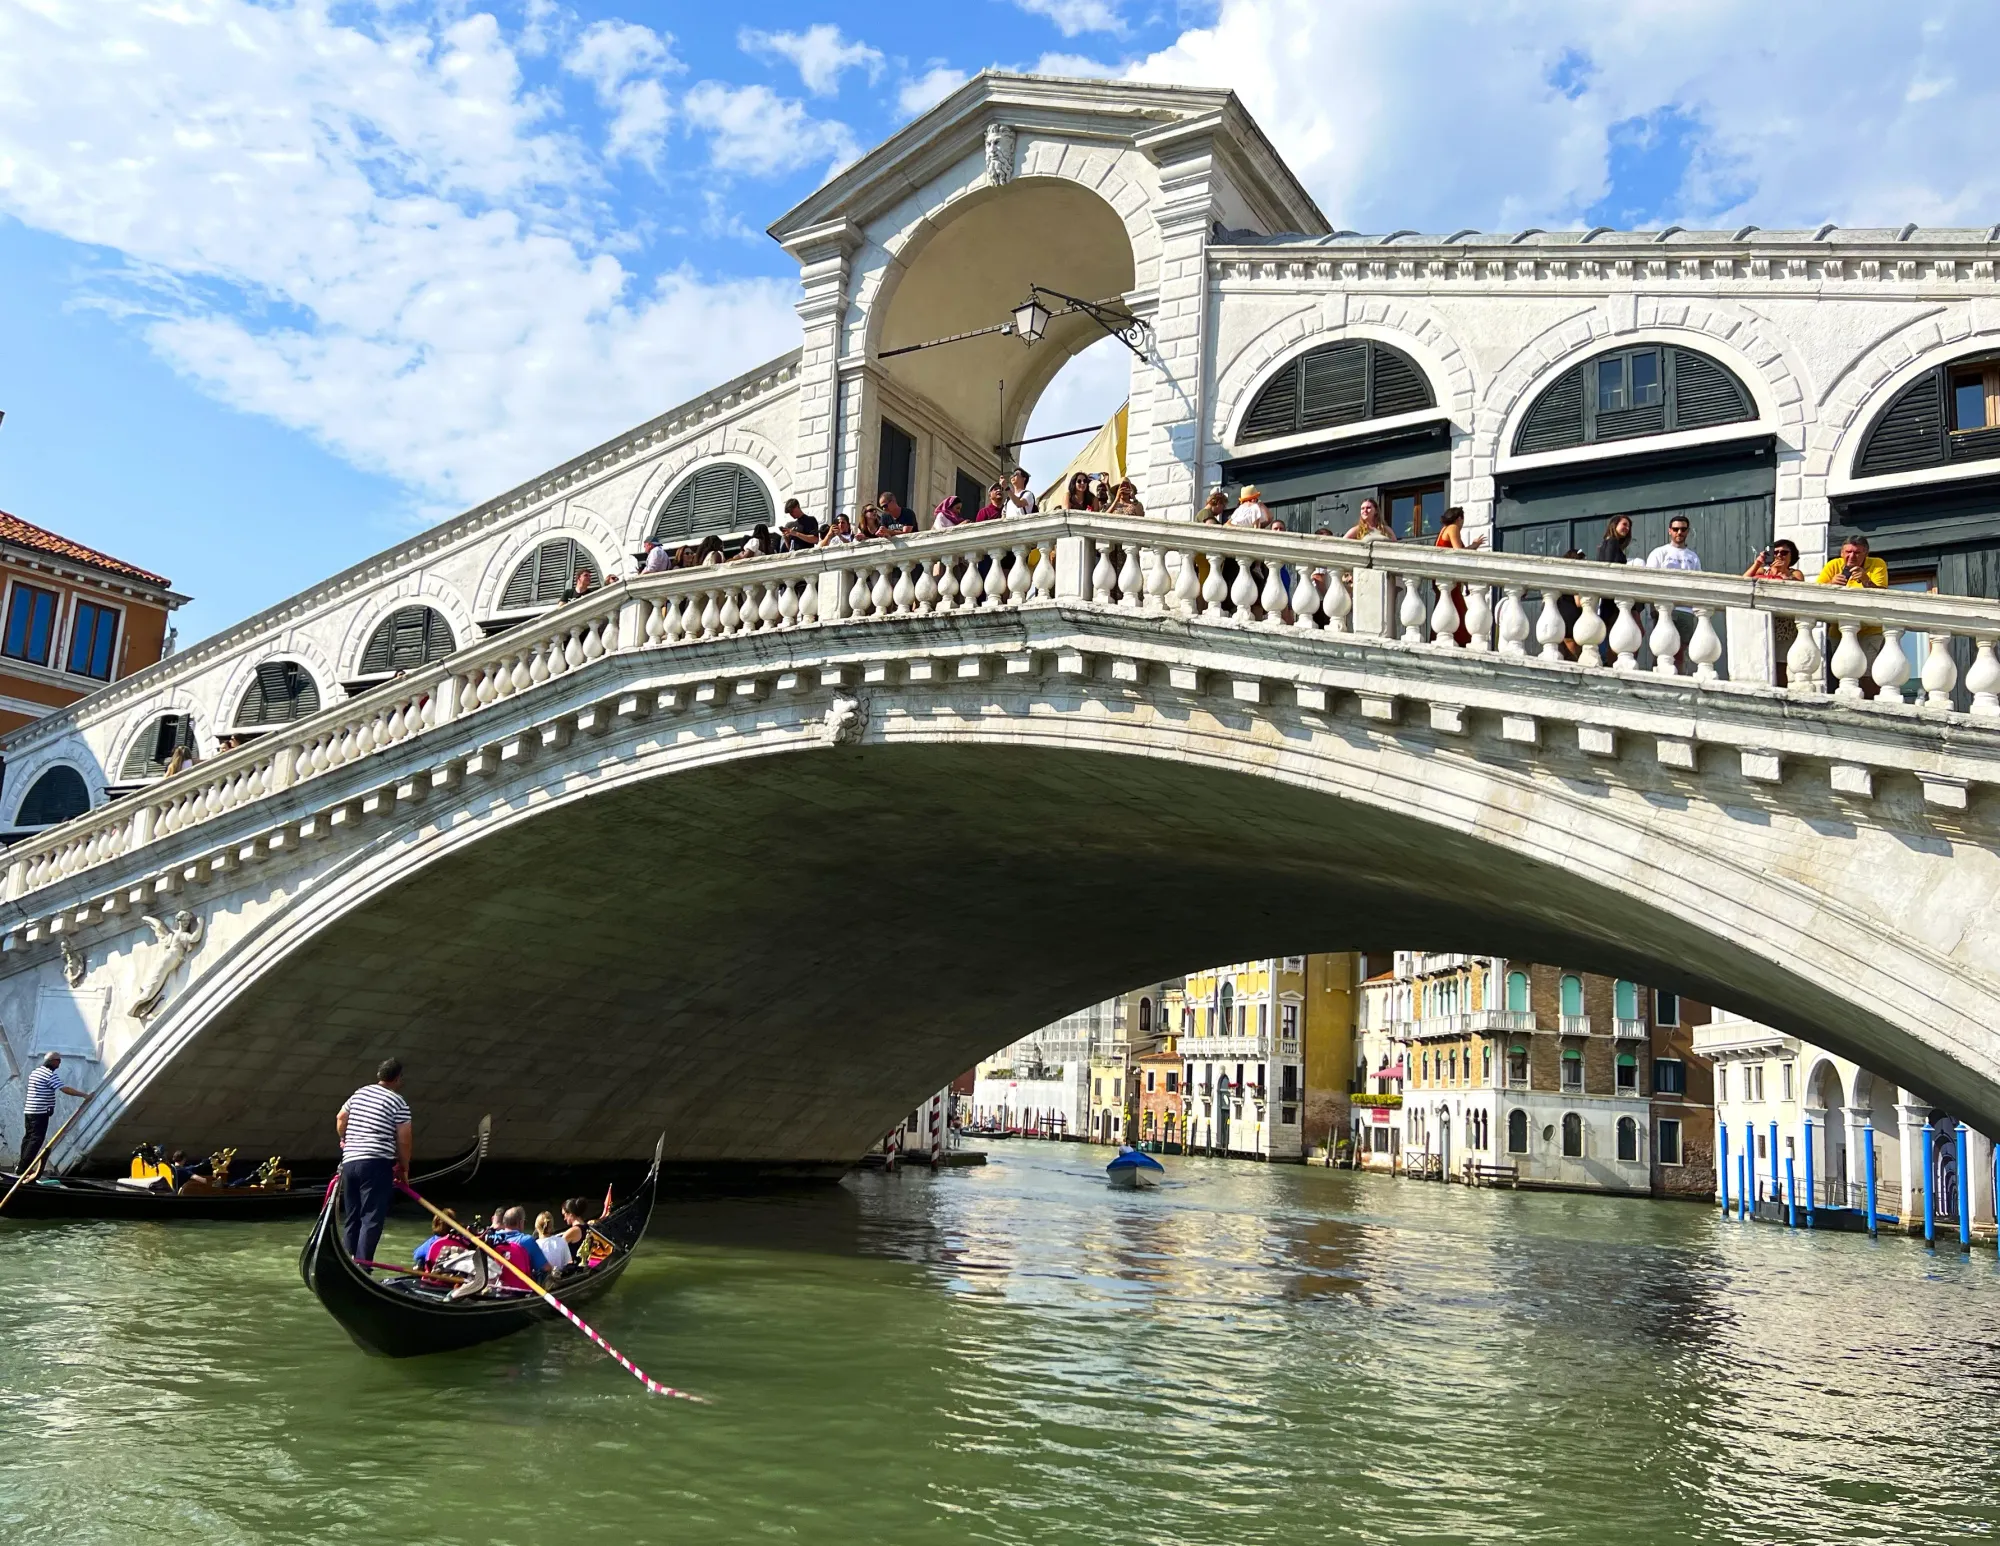 White arched bridge with a gondola passing under it